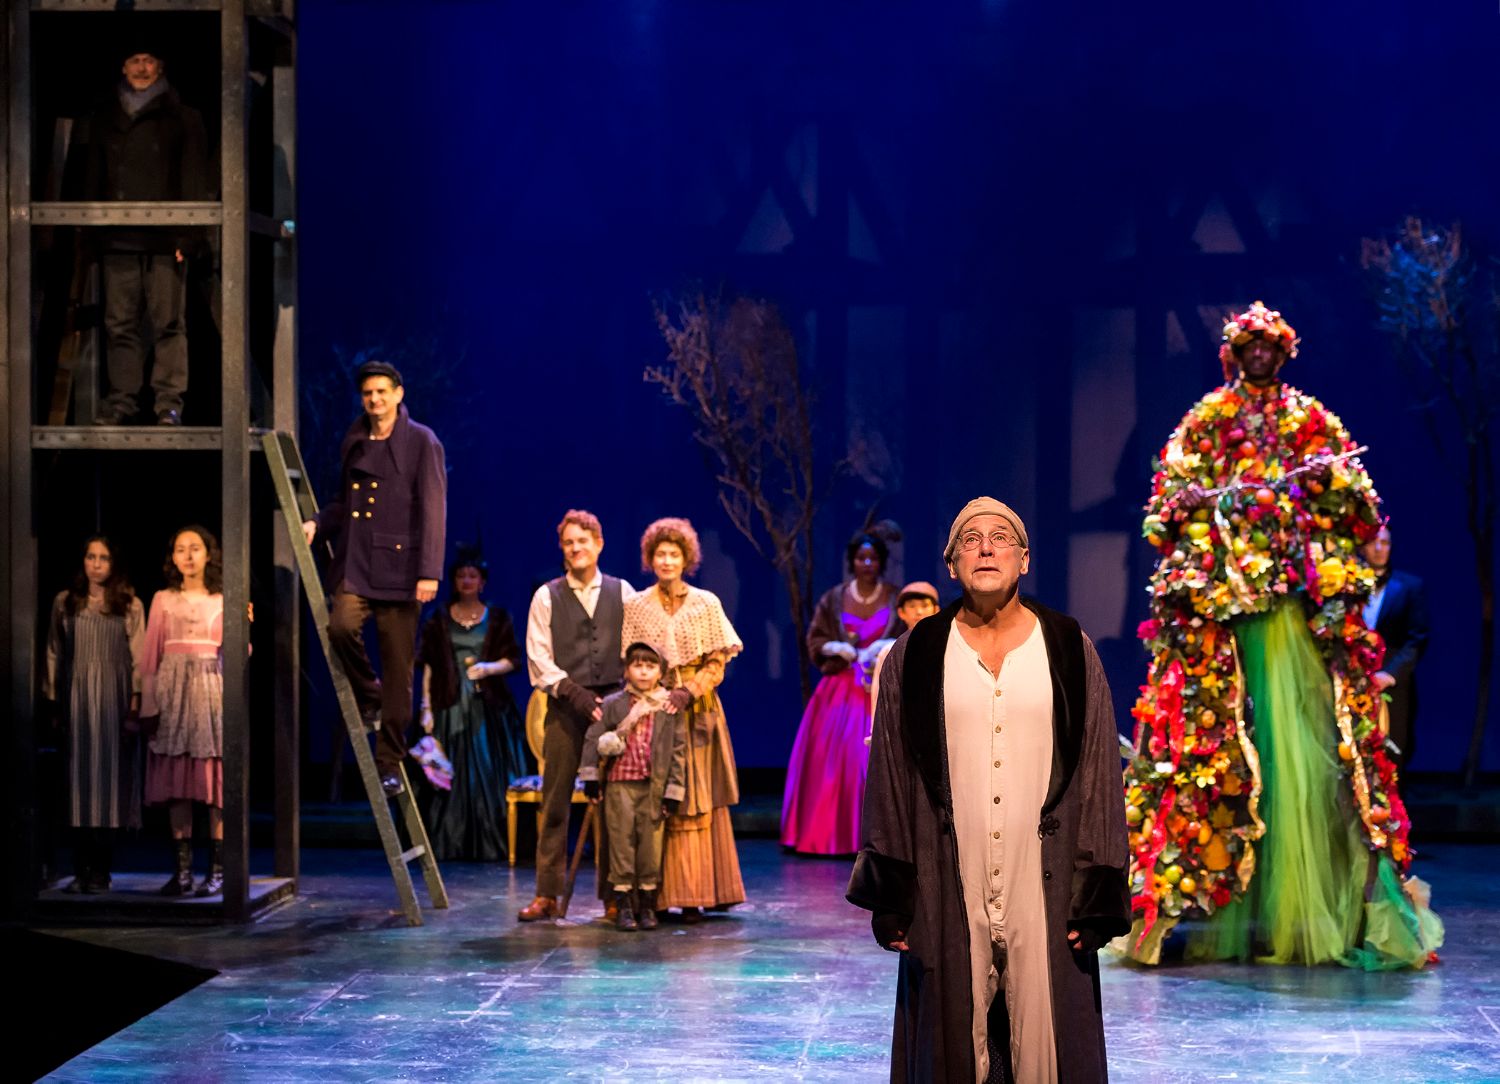 PHOTO: Craig Schwartz | The South Pasadenan | The cast of A Christmas Carol at A Noise Within.